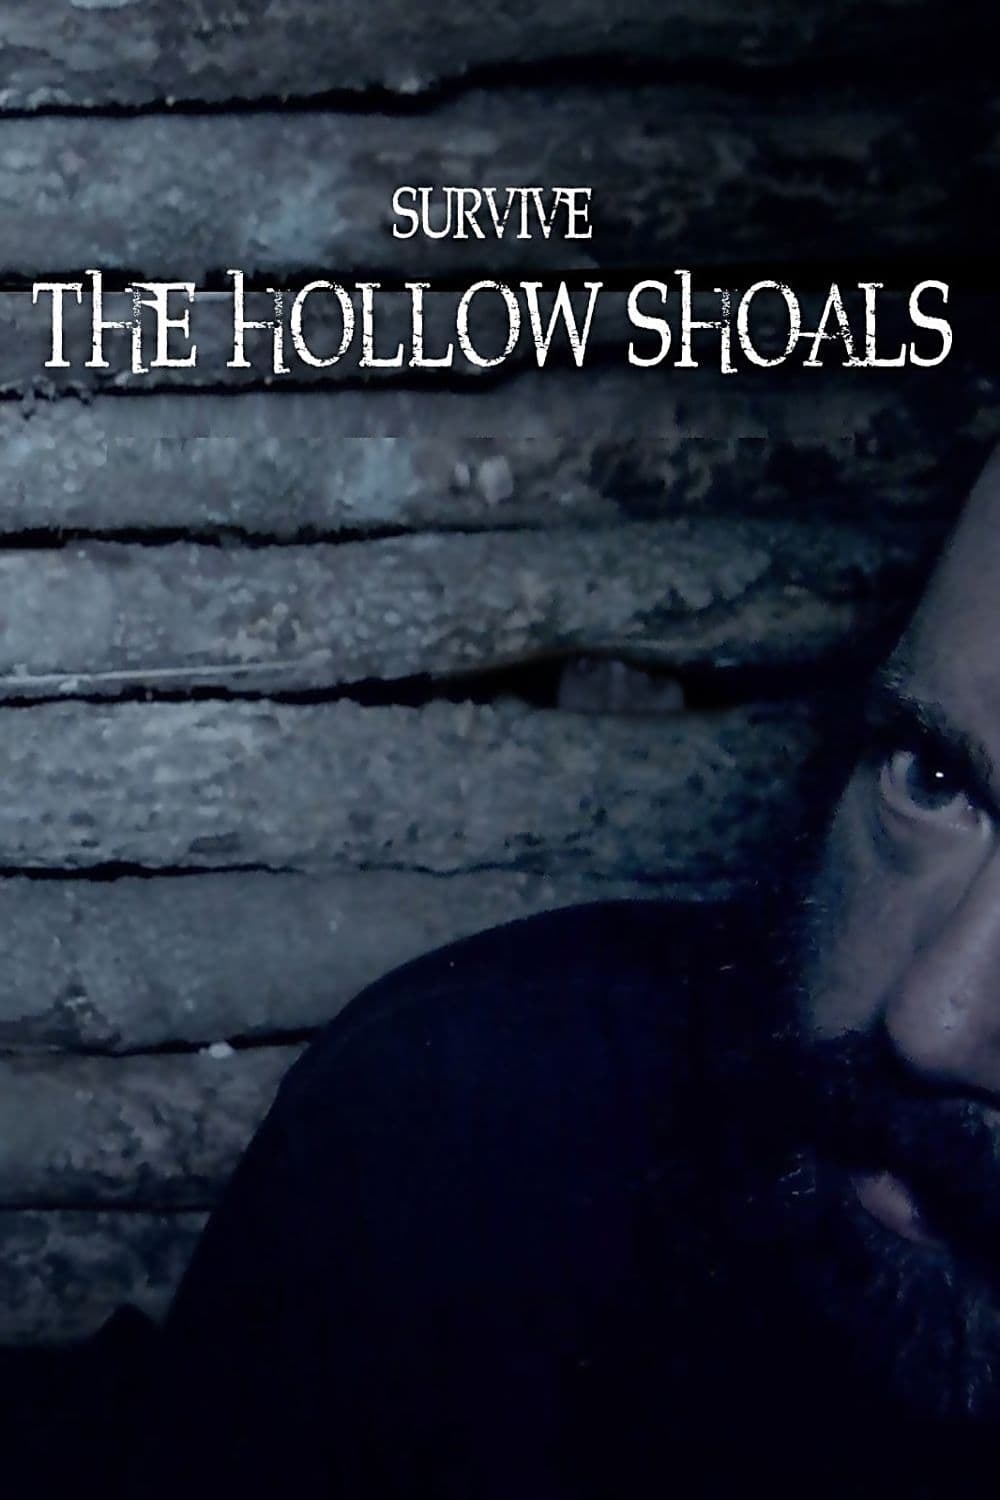 Survive the Hollow Shoals 2018 1080p found footage